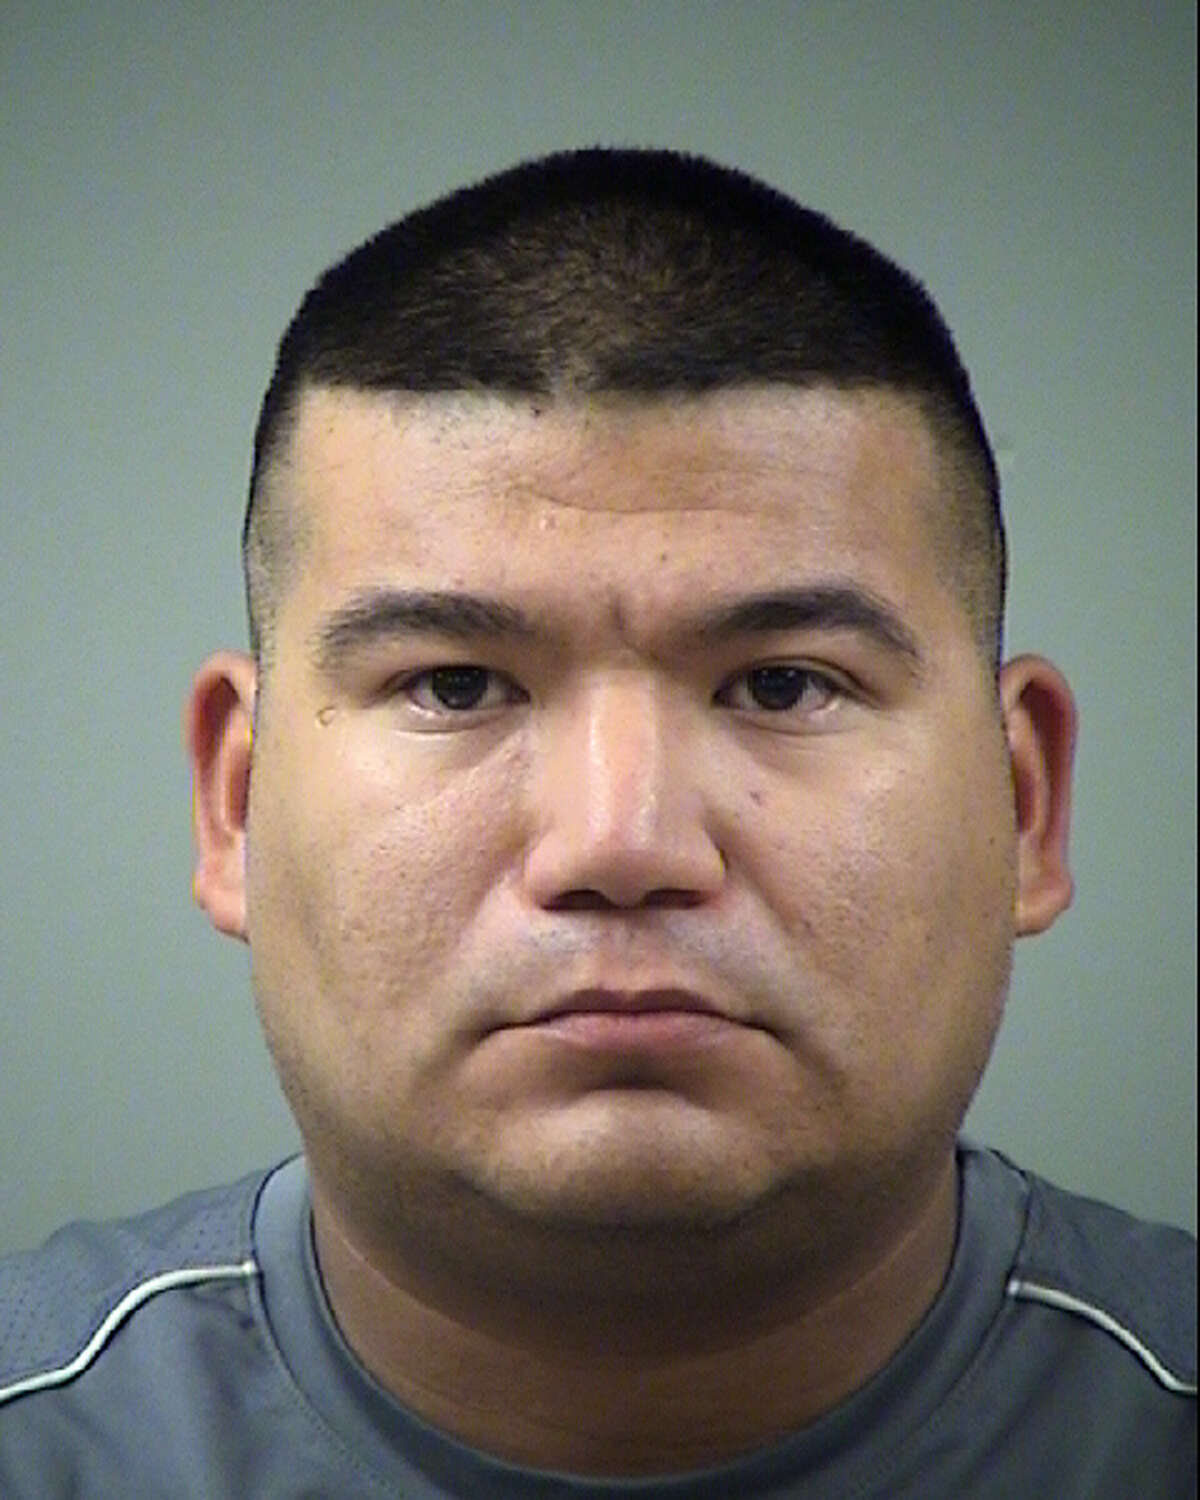 Israel Gomez, 31, a Bexar County Sheriff's deputy, was arrested Nov. 11, 2016, on a misdemeanor charge of driving while intoxicated.